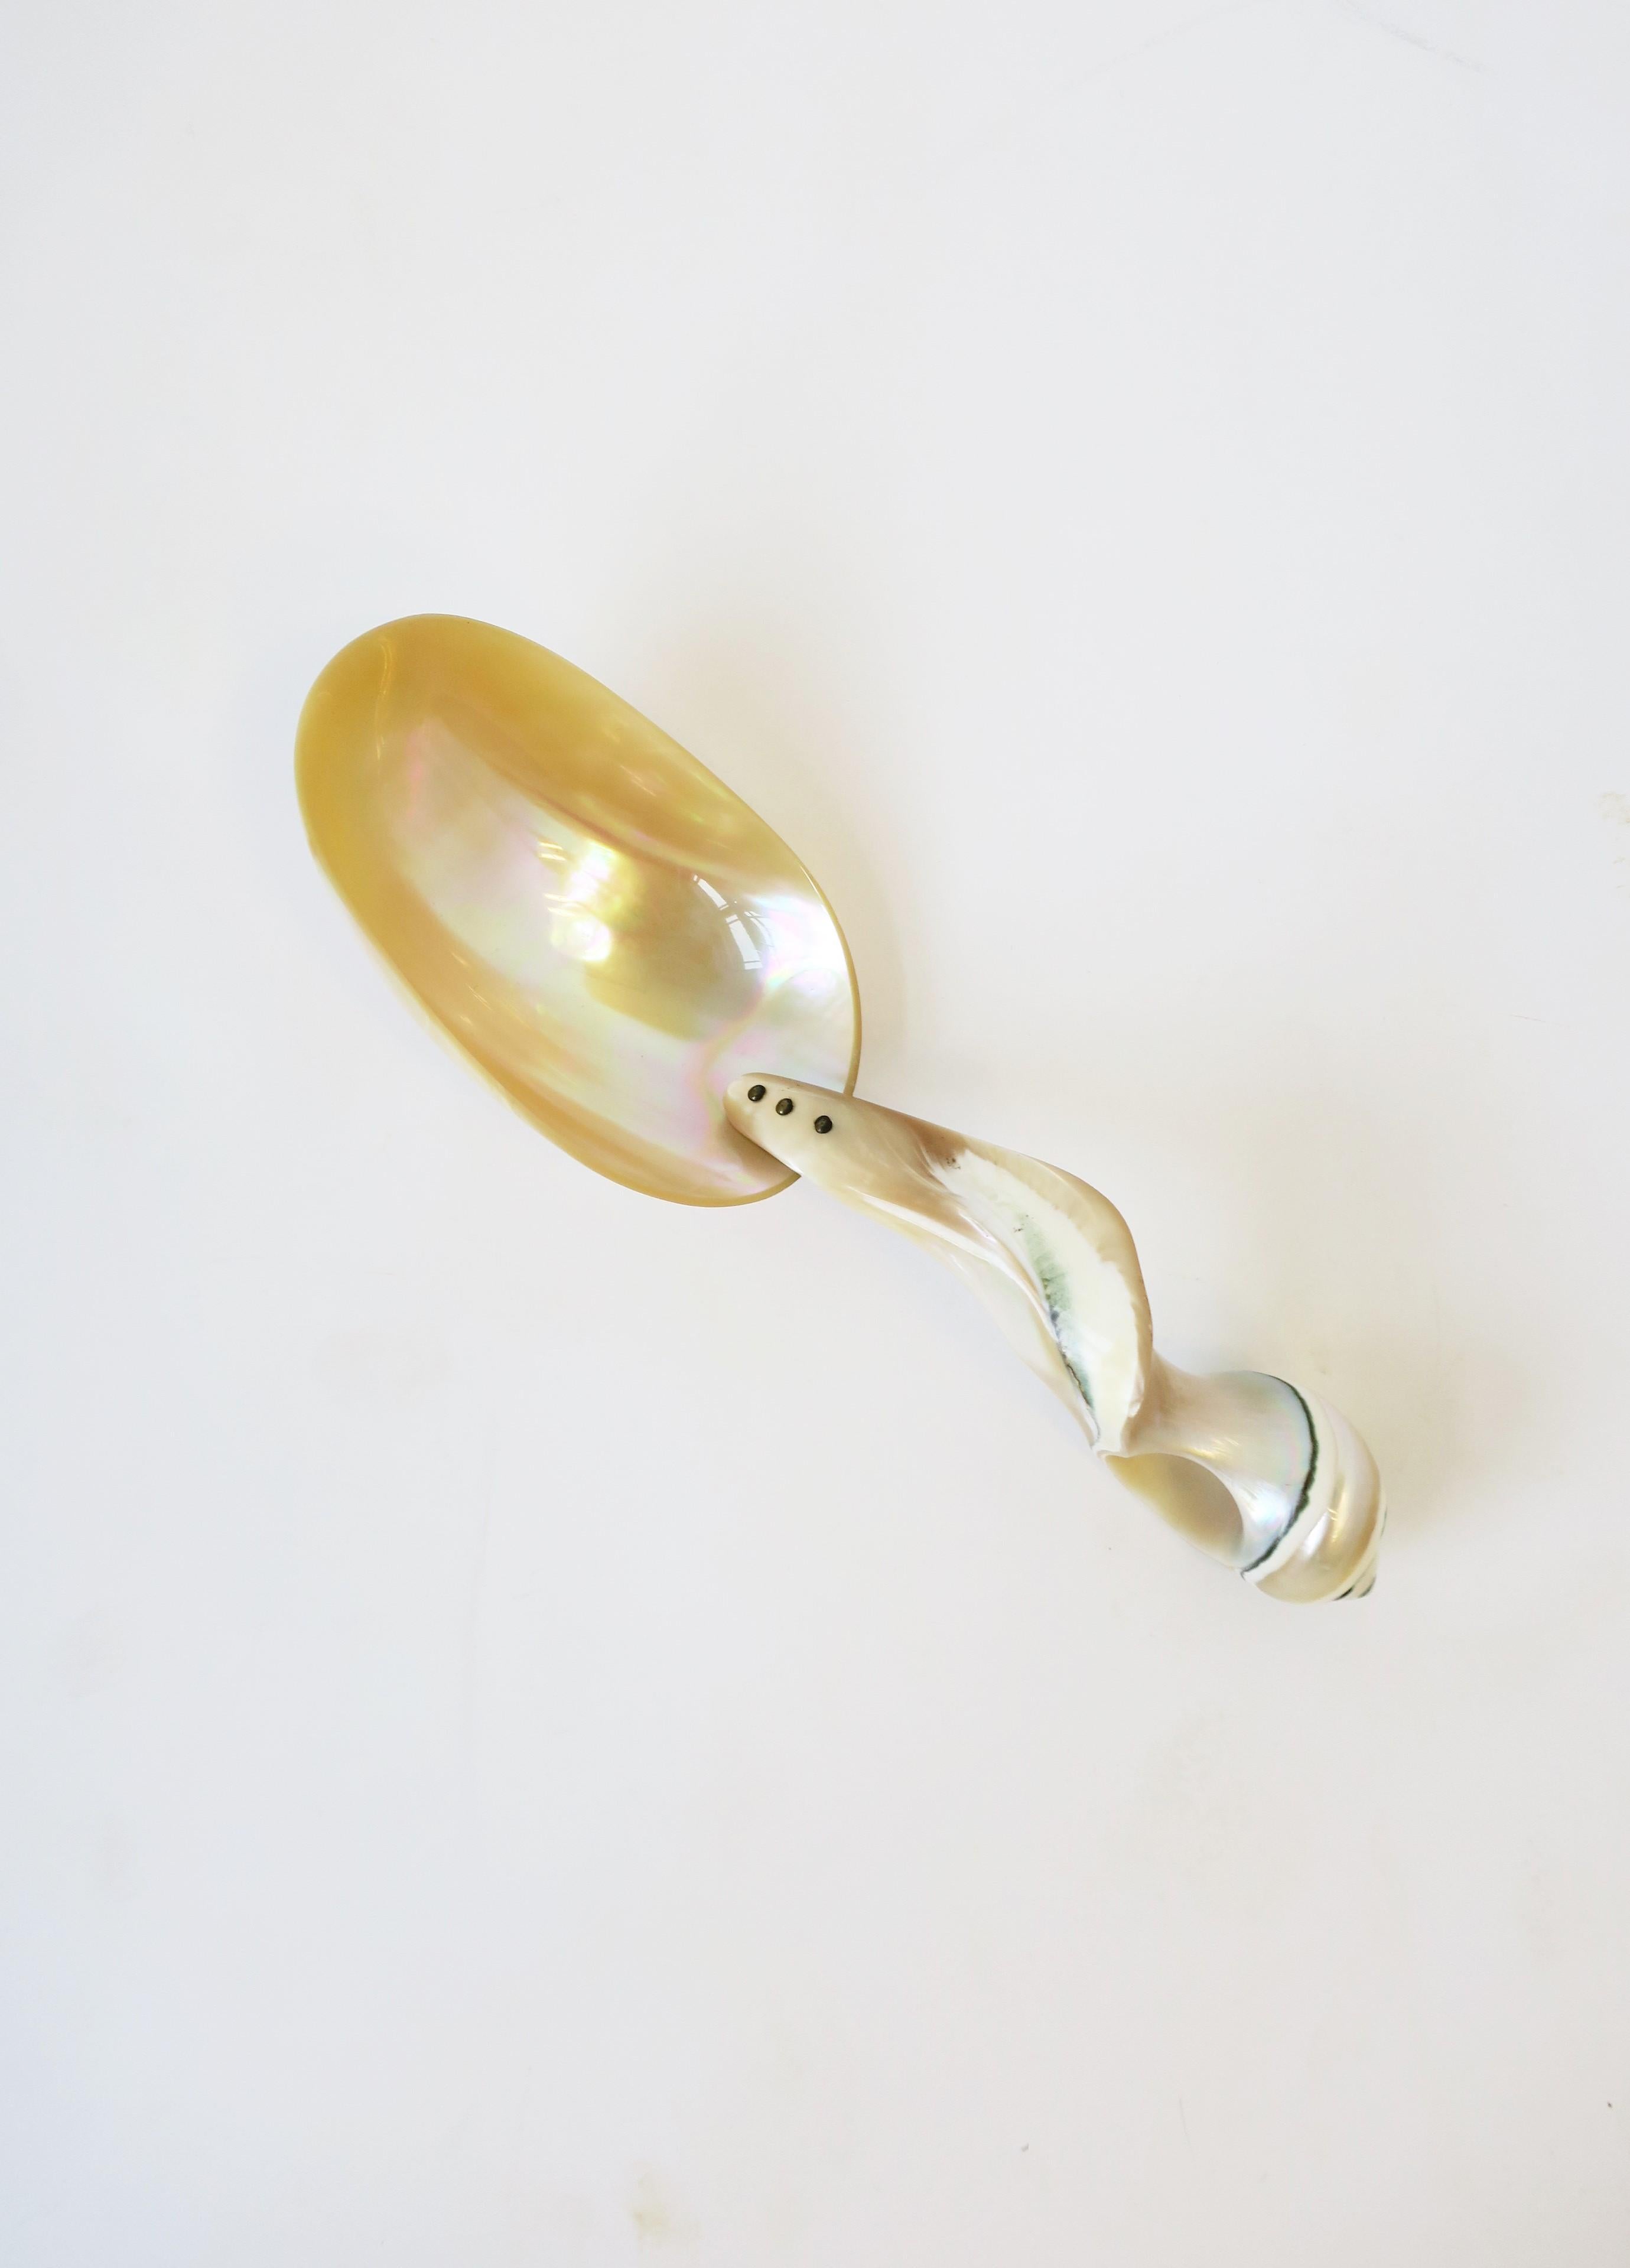 Organic Modern Mother of Pearl Seashell Spoon or Caviar Vessel For Sale